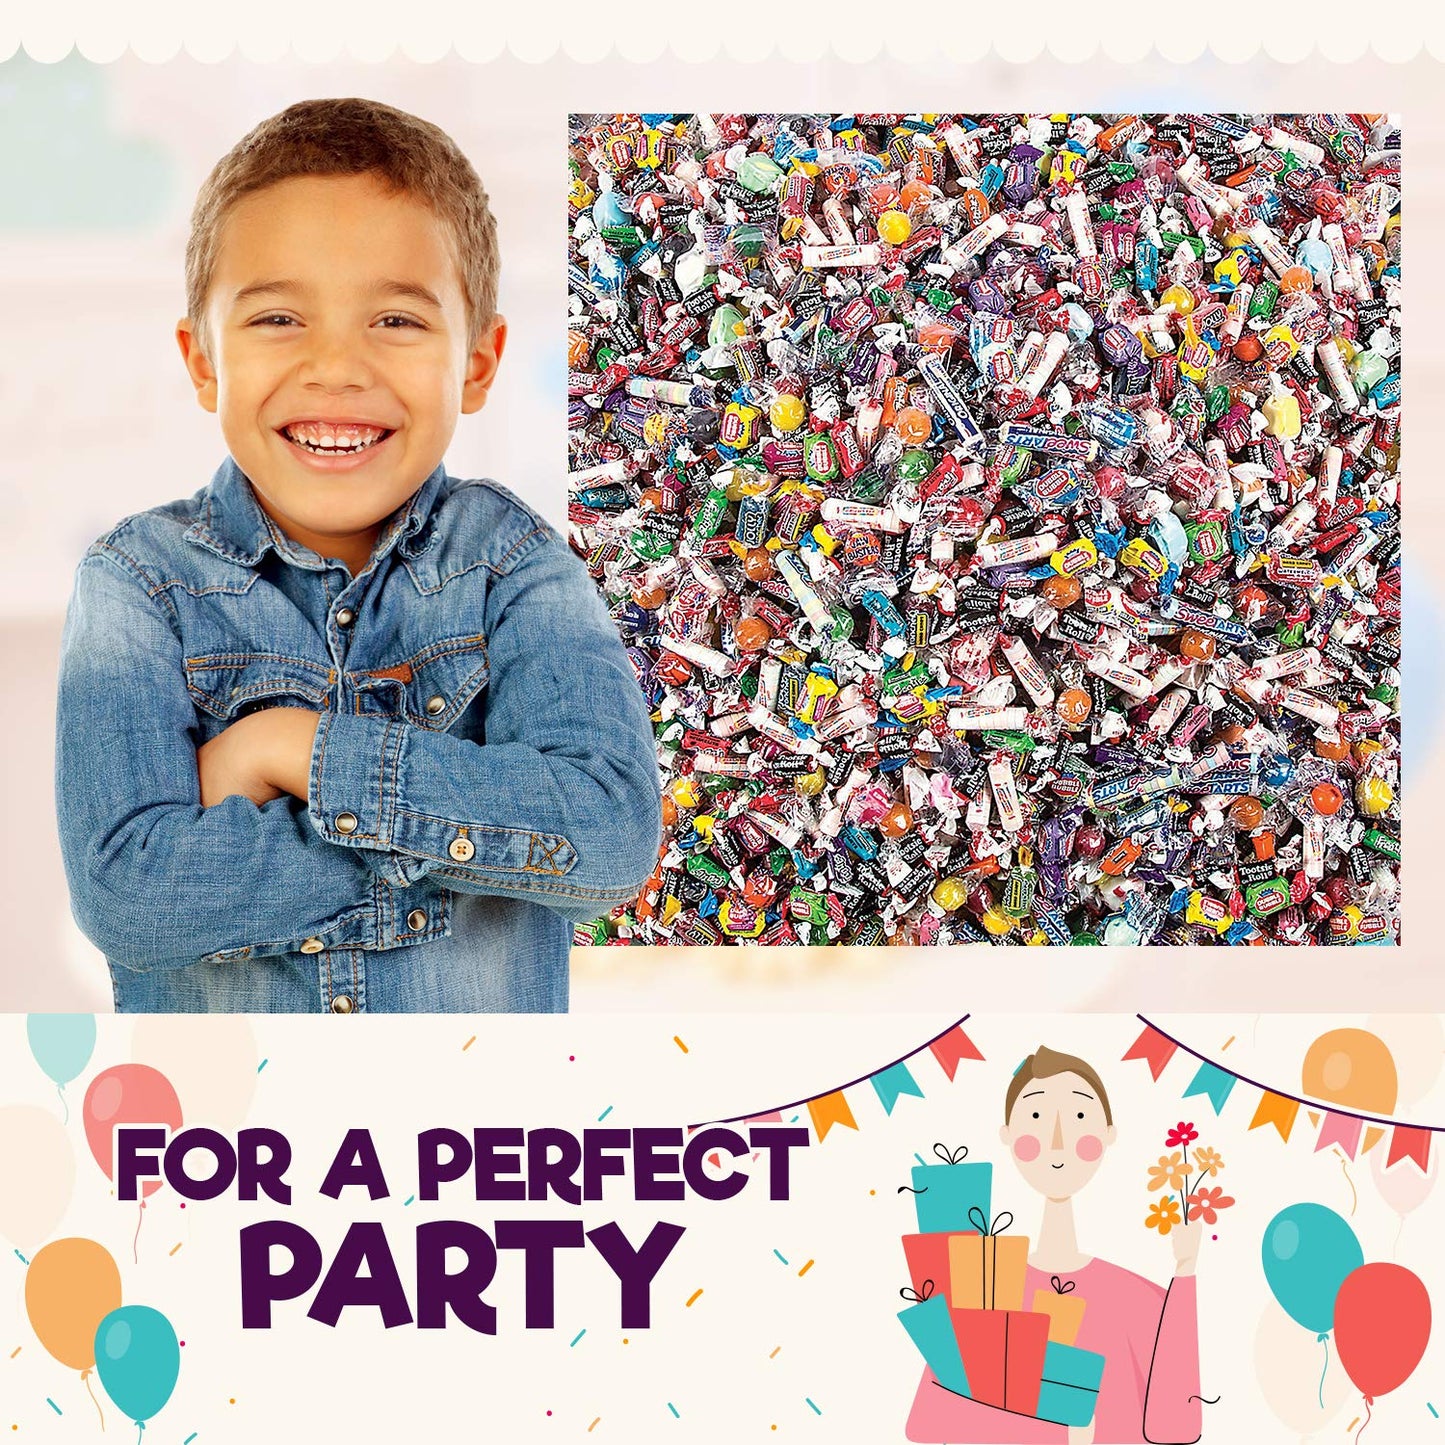 3000 Pieces, 30 Lbs, Bulk Candy Individually Wrapped for Parades, Pinata Candy Variety Pack, Carnival, Office Candy Mix, Candy Birthday Party Favors for Goodie Bags, Halloween, Easter, 4Th of July, Vacation Bible Study